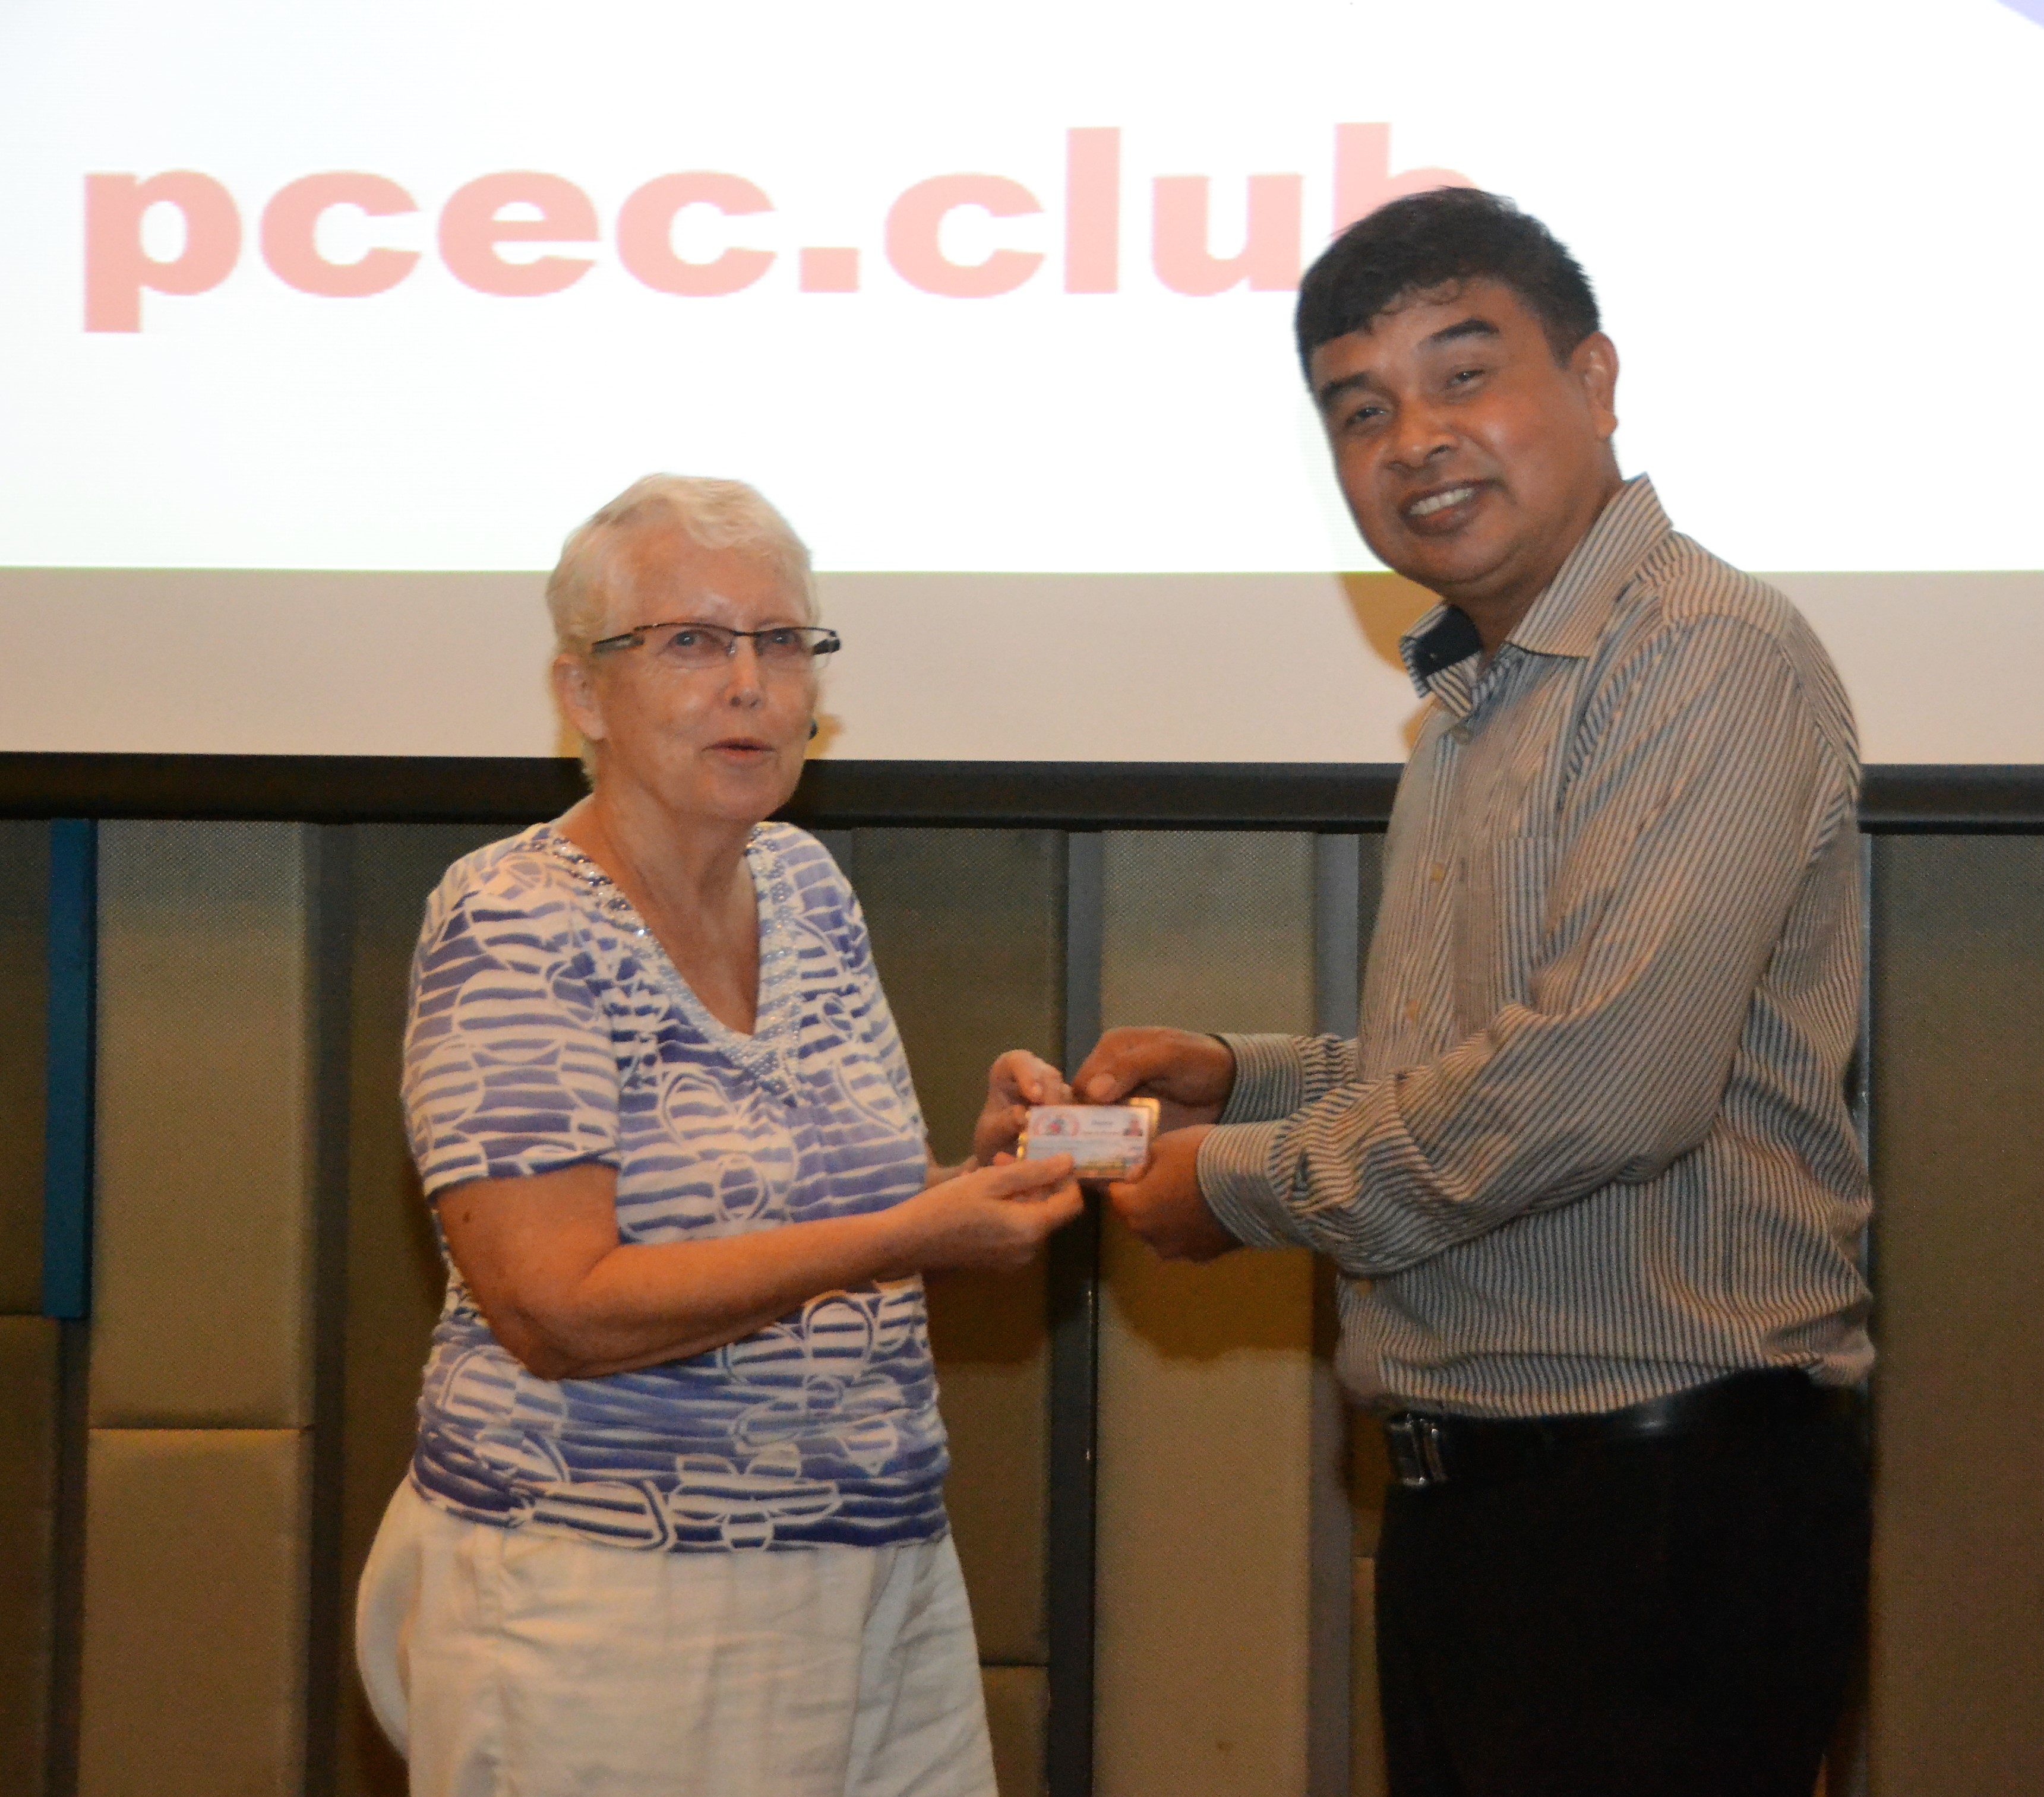 Chatchai Sriphoornthe, Deputy Chief for Banglamung District, presents Club member Donna Westendorf with her Commemoration Card from the District.